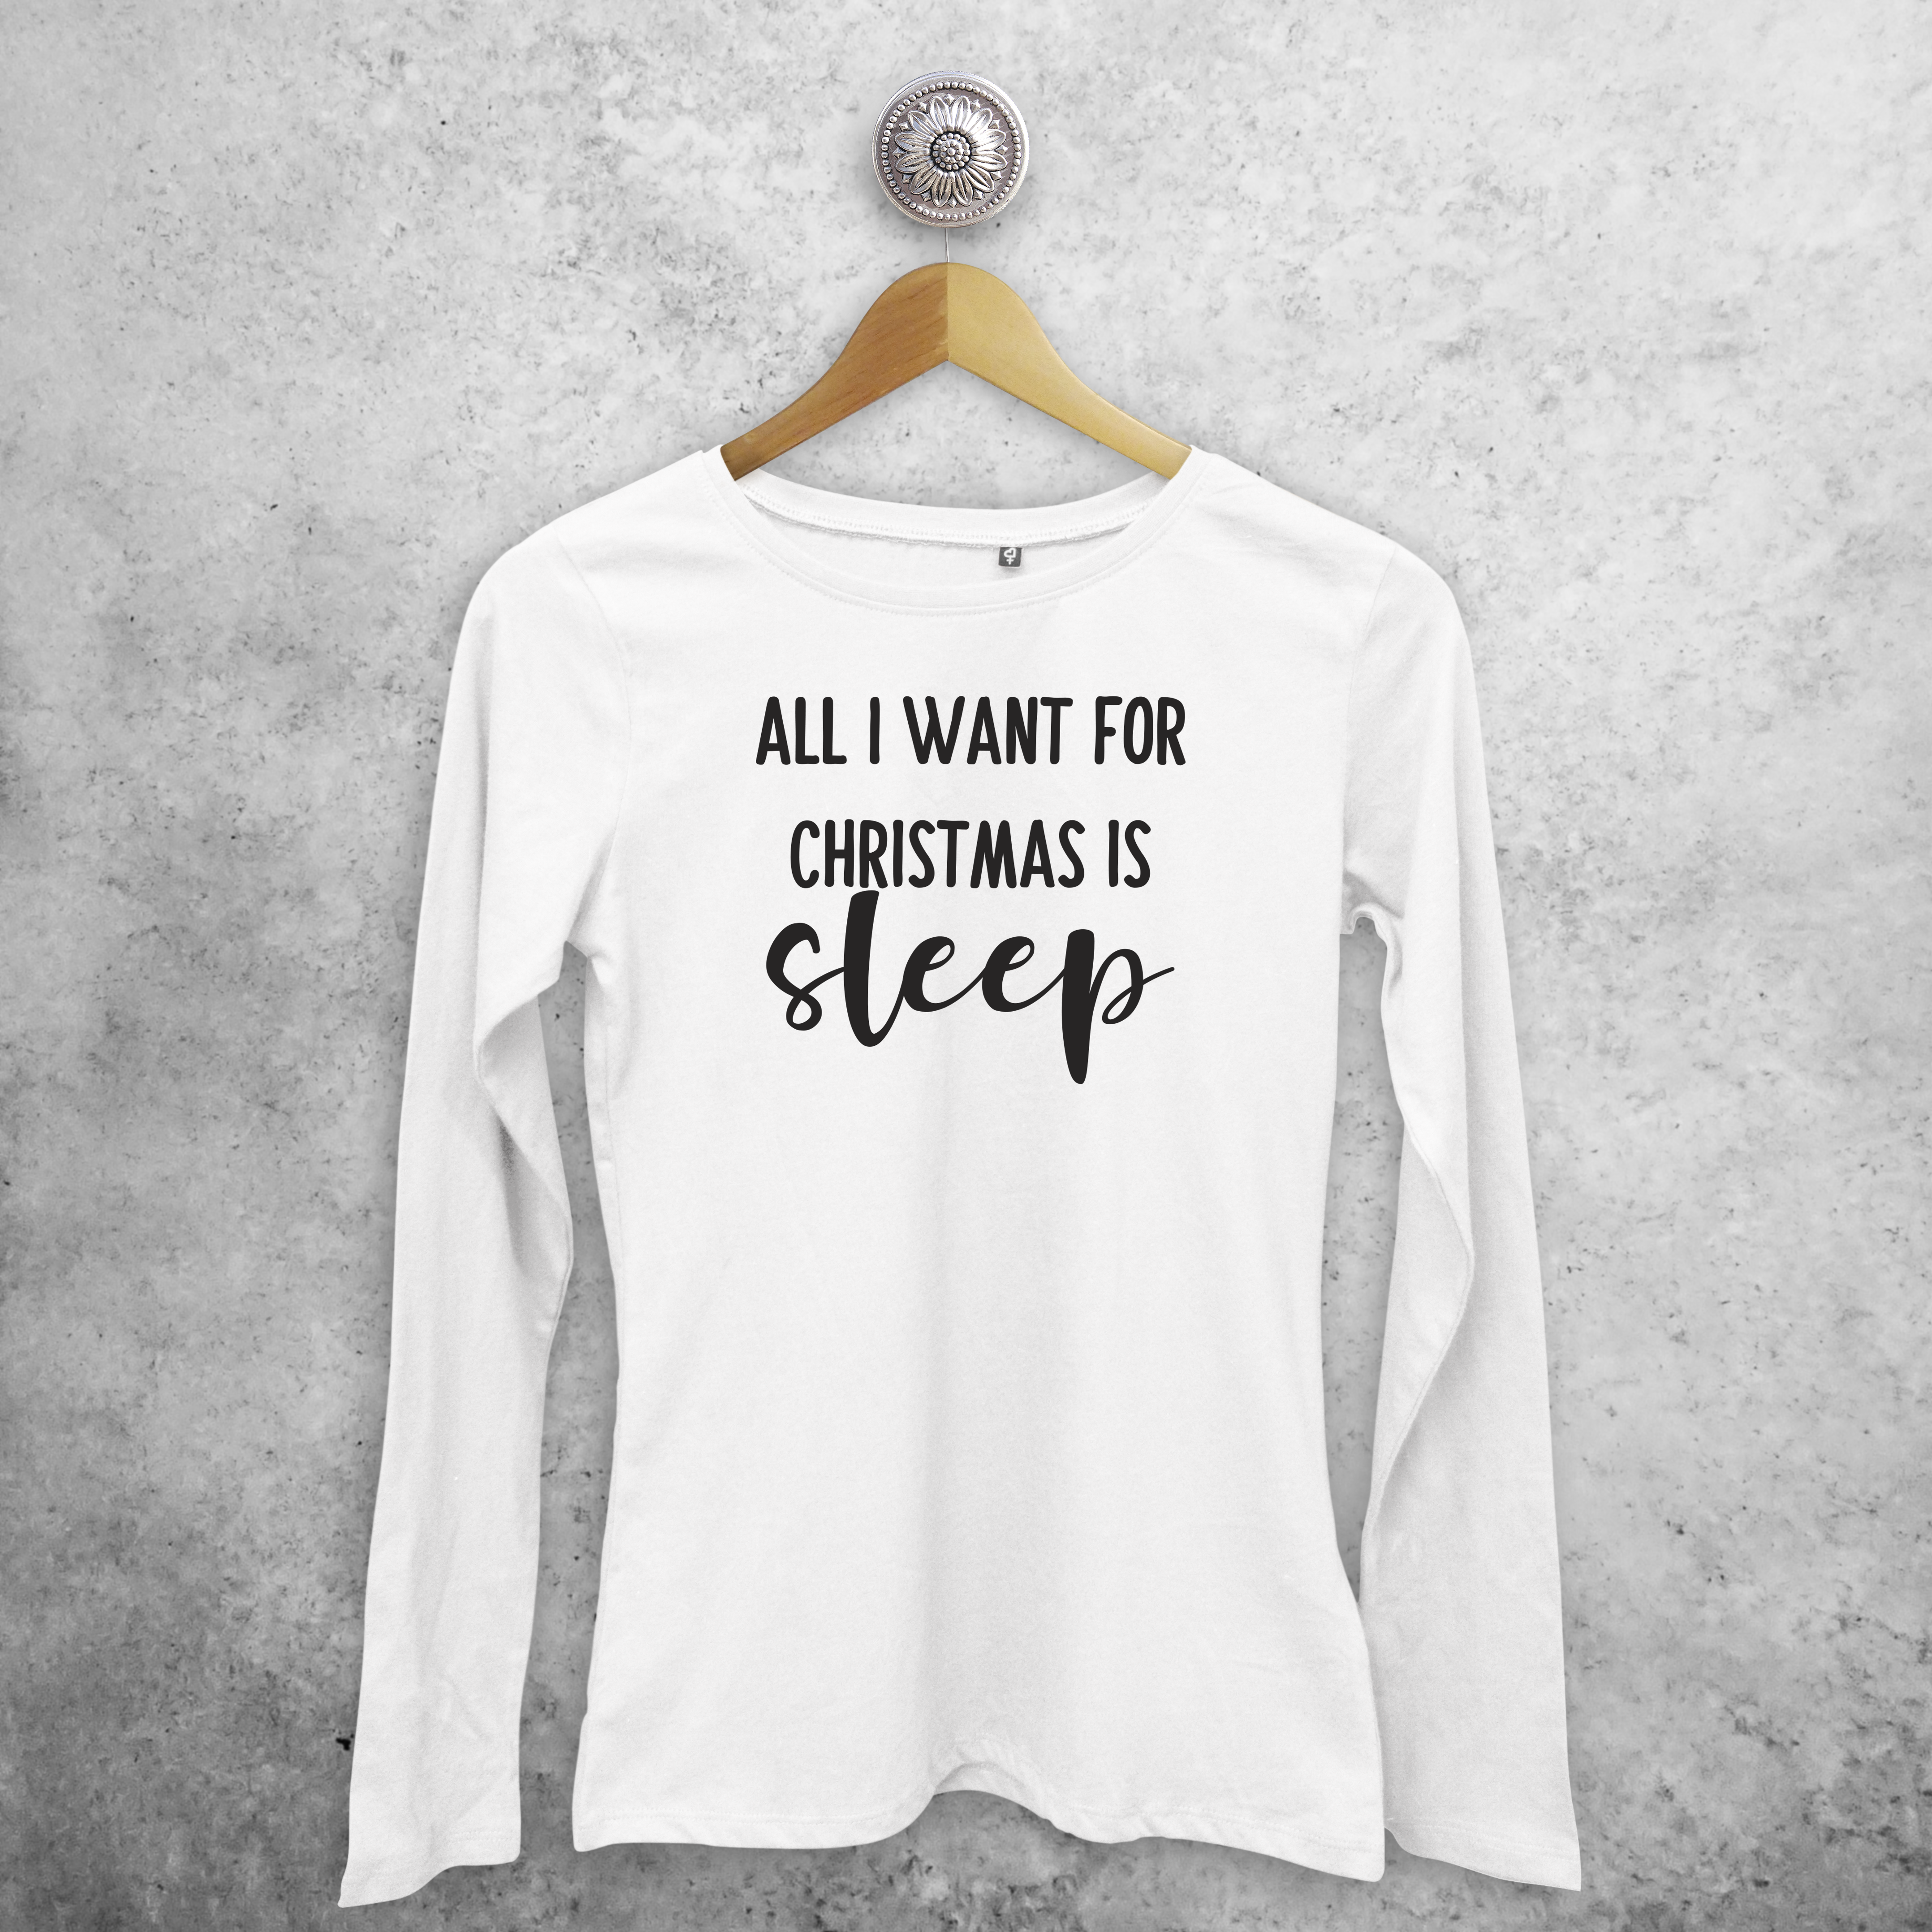 Adult shirt with long sleeves, with ‘All I want for Christmas is sleep’ print by KMLeon.